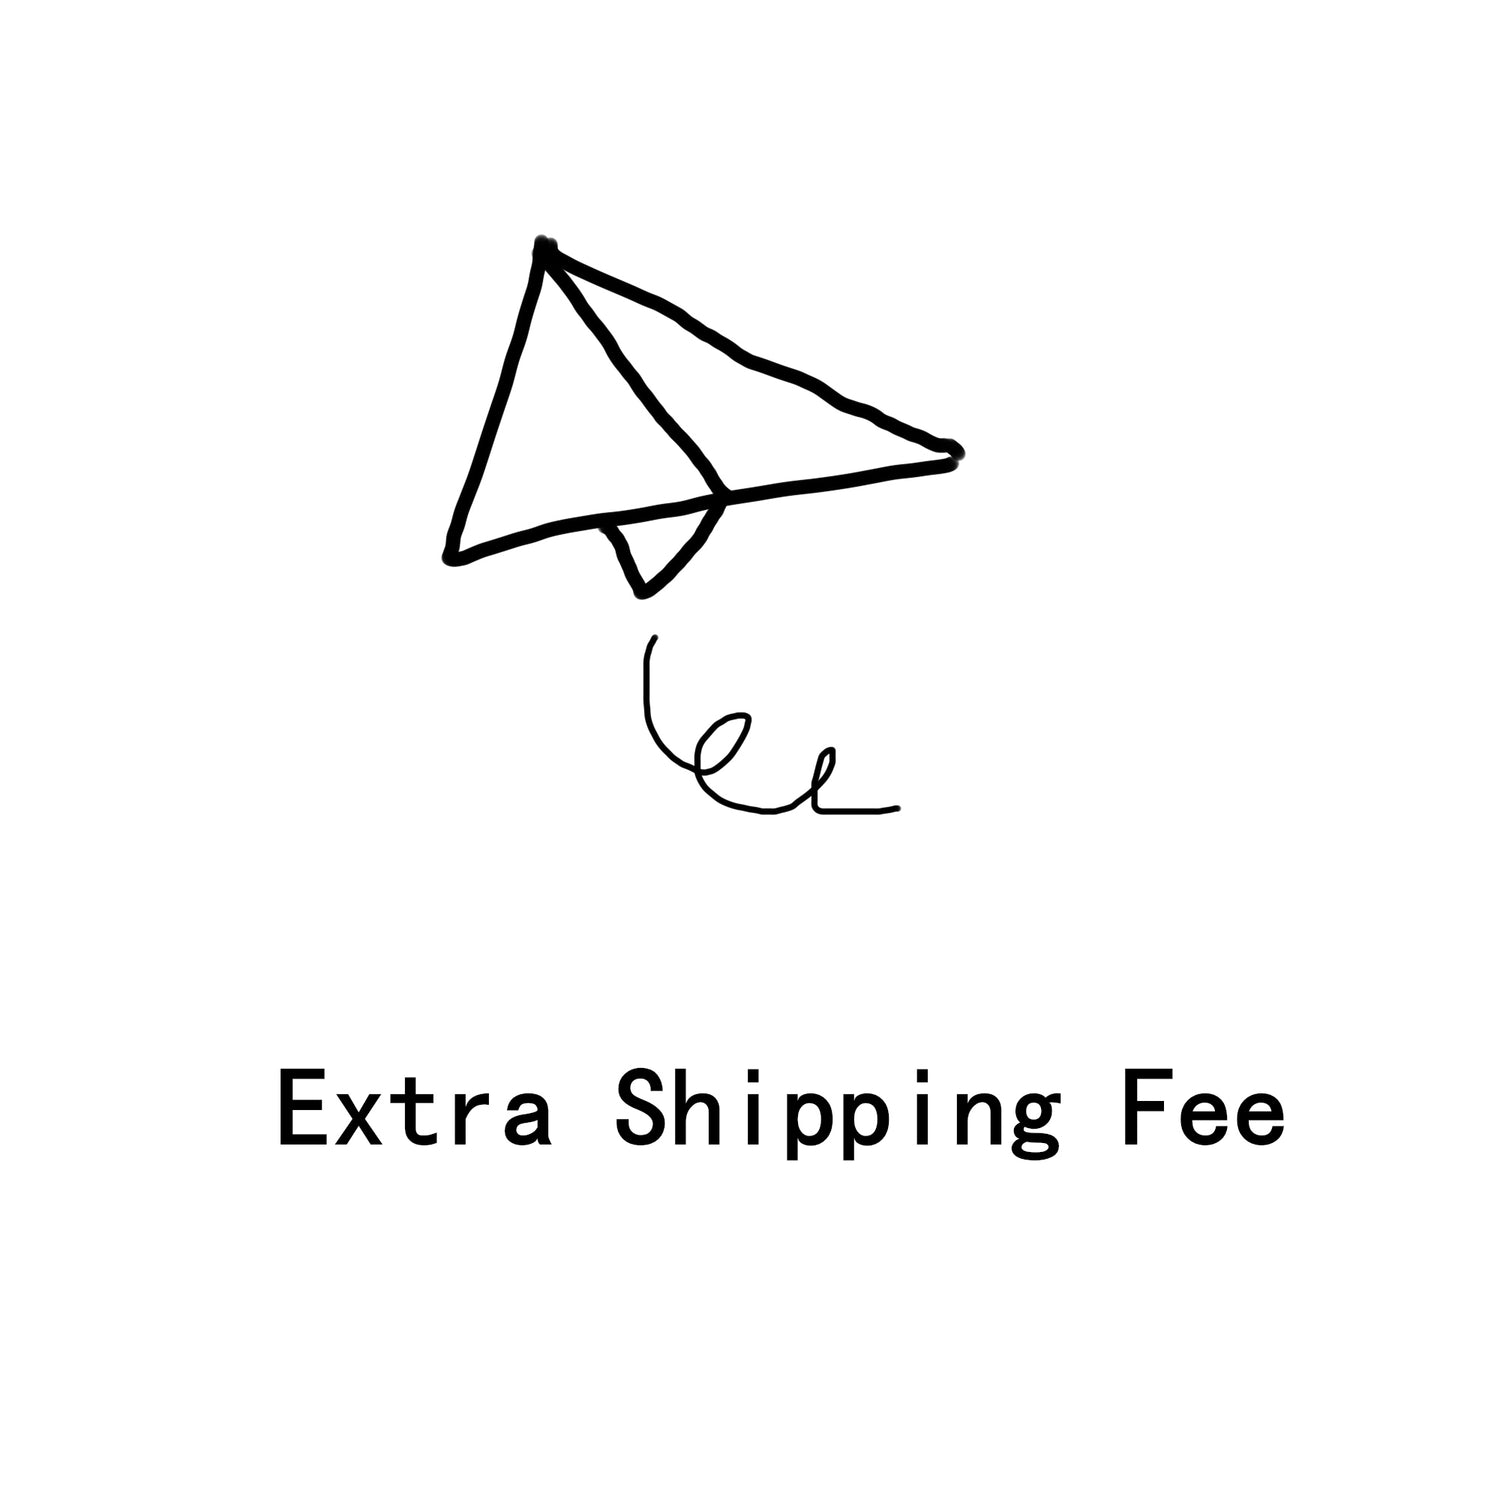 Expedited Shipping Fee of $19.99